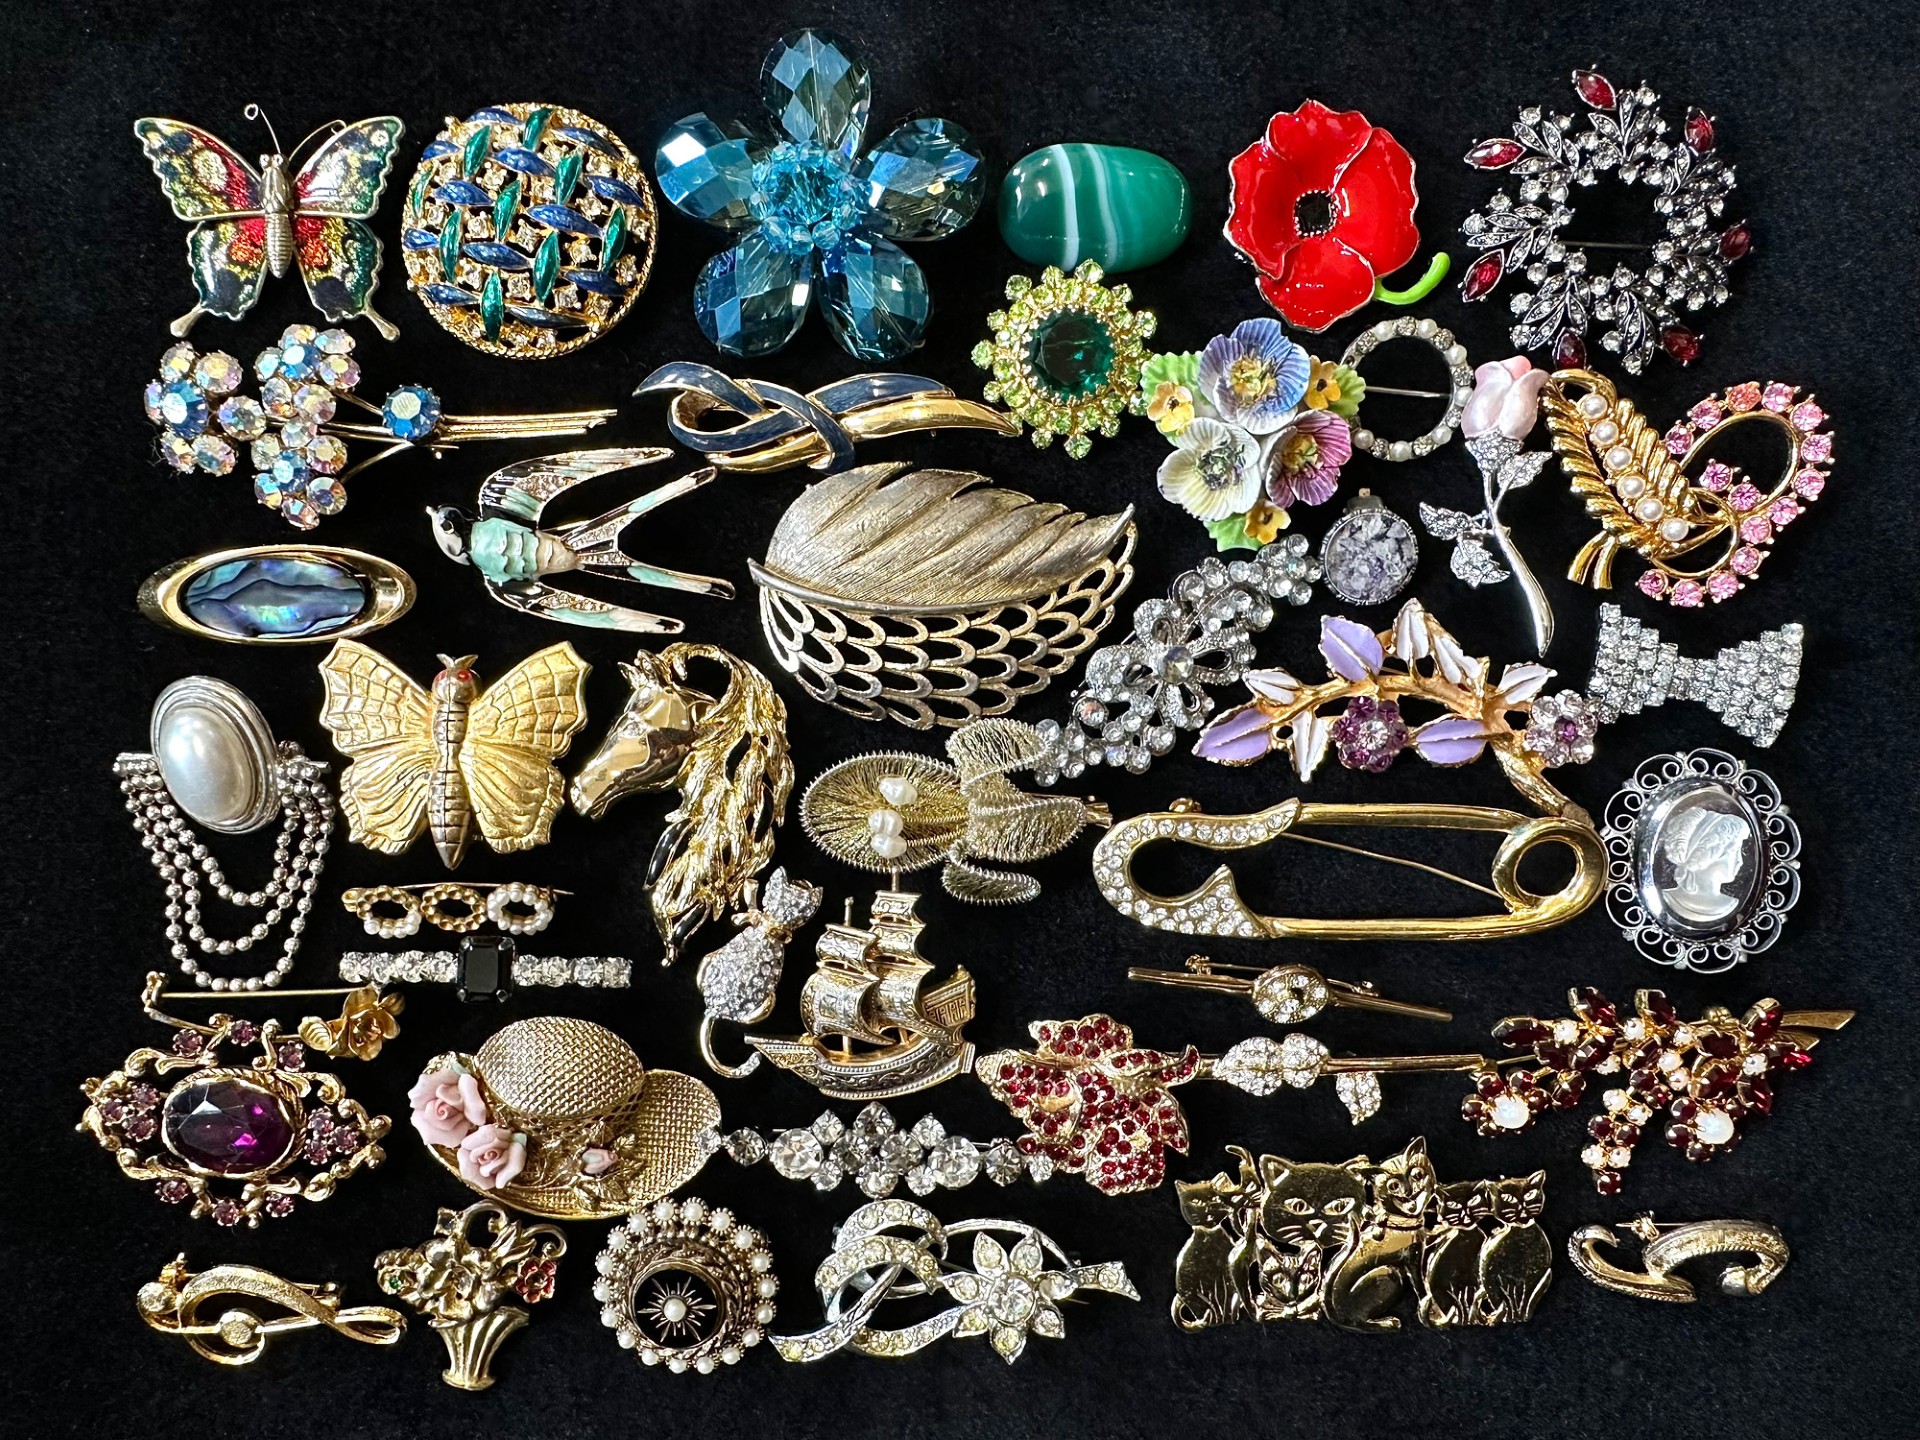 Large Collection of Vintage Brooches. costume jewellery, full of stone set and enamel brooches etc.